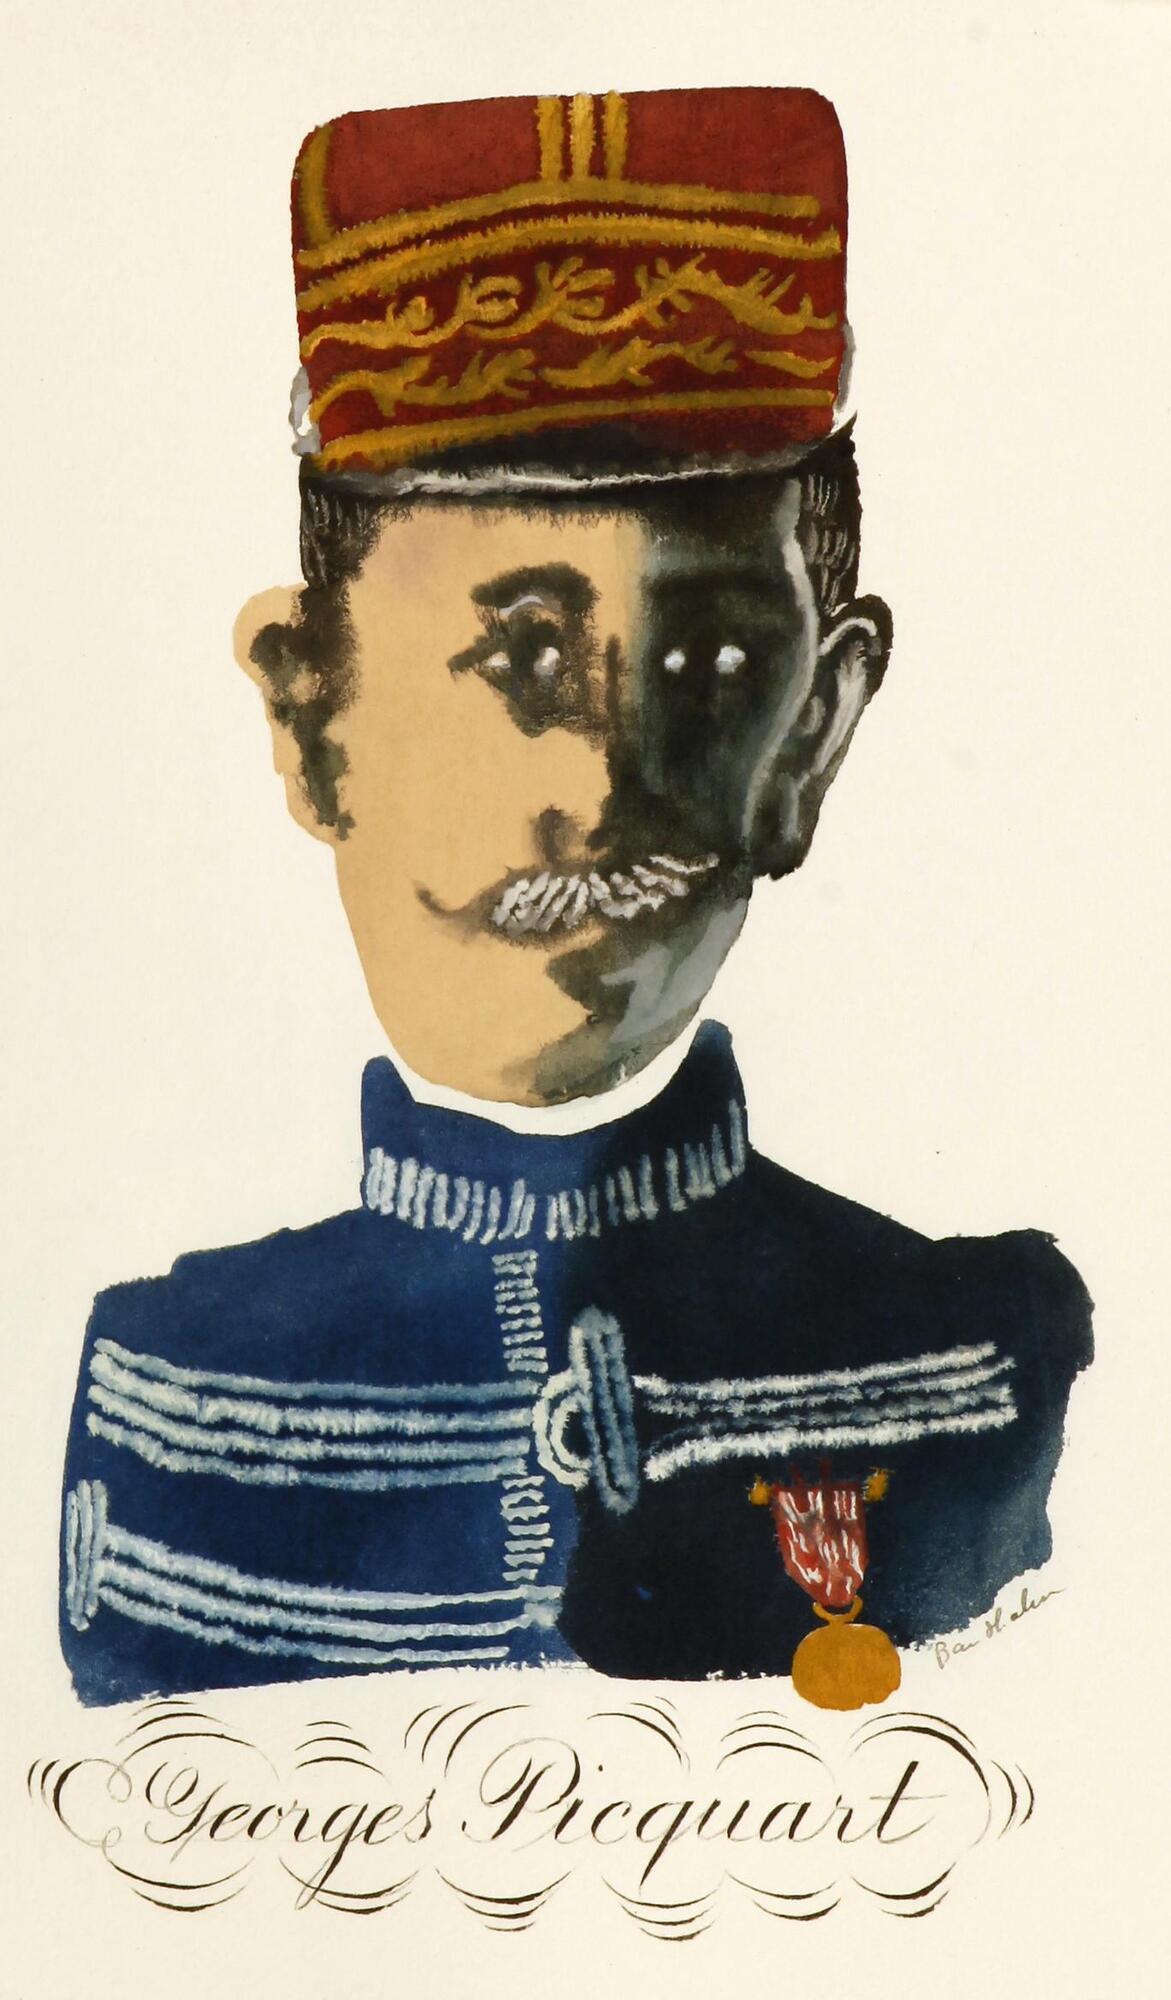 A portrait of a man in decorated uniform.  The man faces the viewer directly, and is painted in bold colors with a watercolor-like effect.  Beneath the portrait reads "Georges Picquart", who was an investigator on the Dreyfus trial.